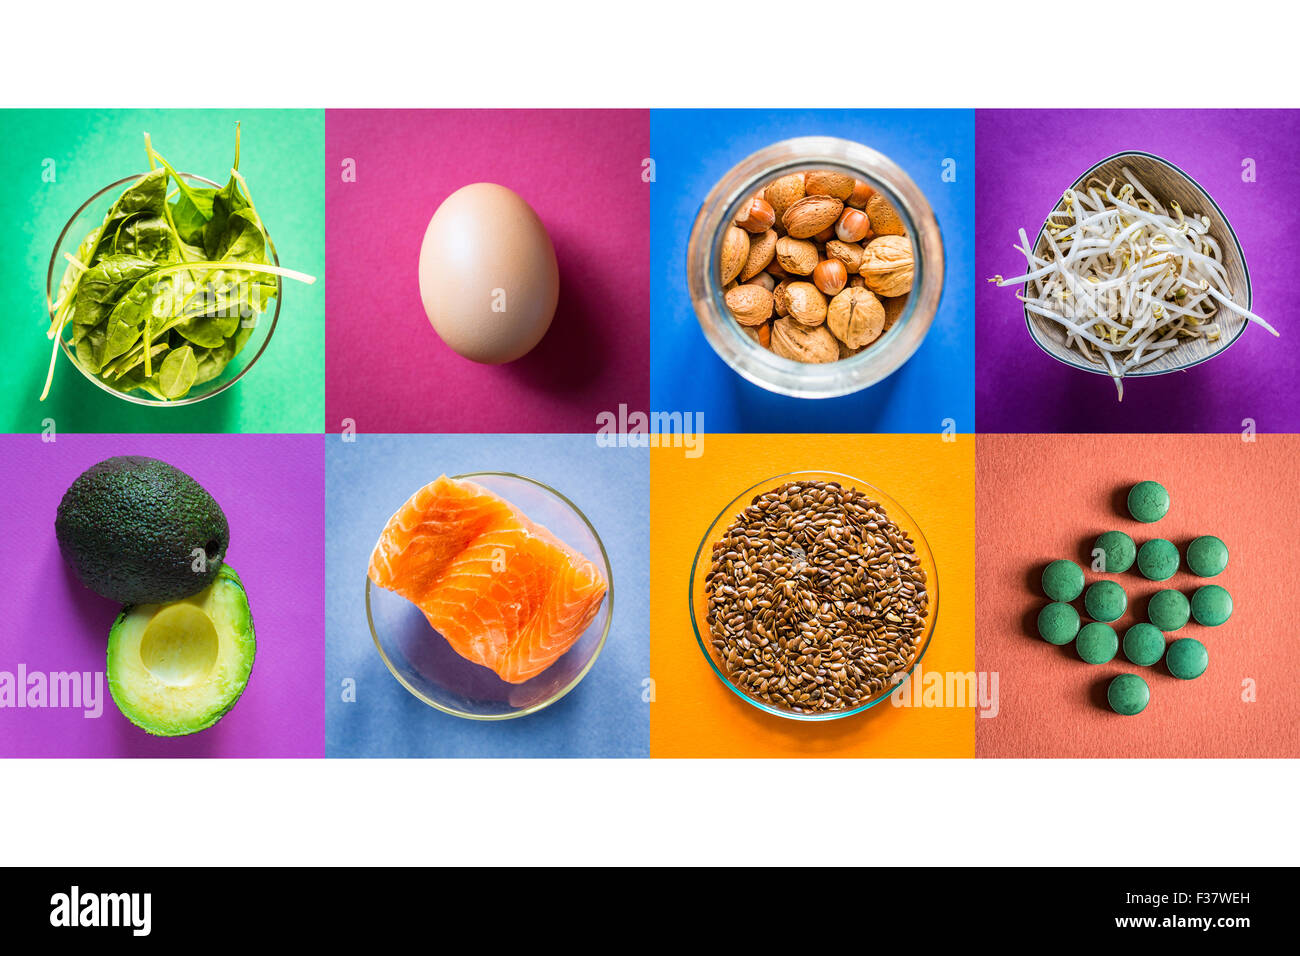 Omega 3-rich foods. Stock Photo